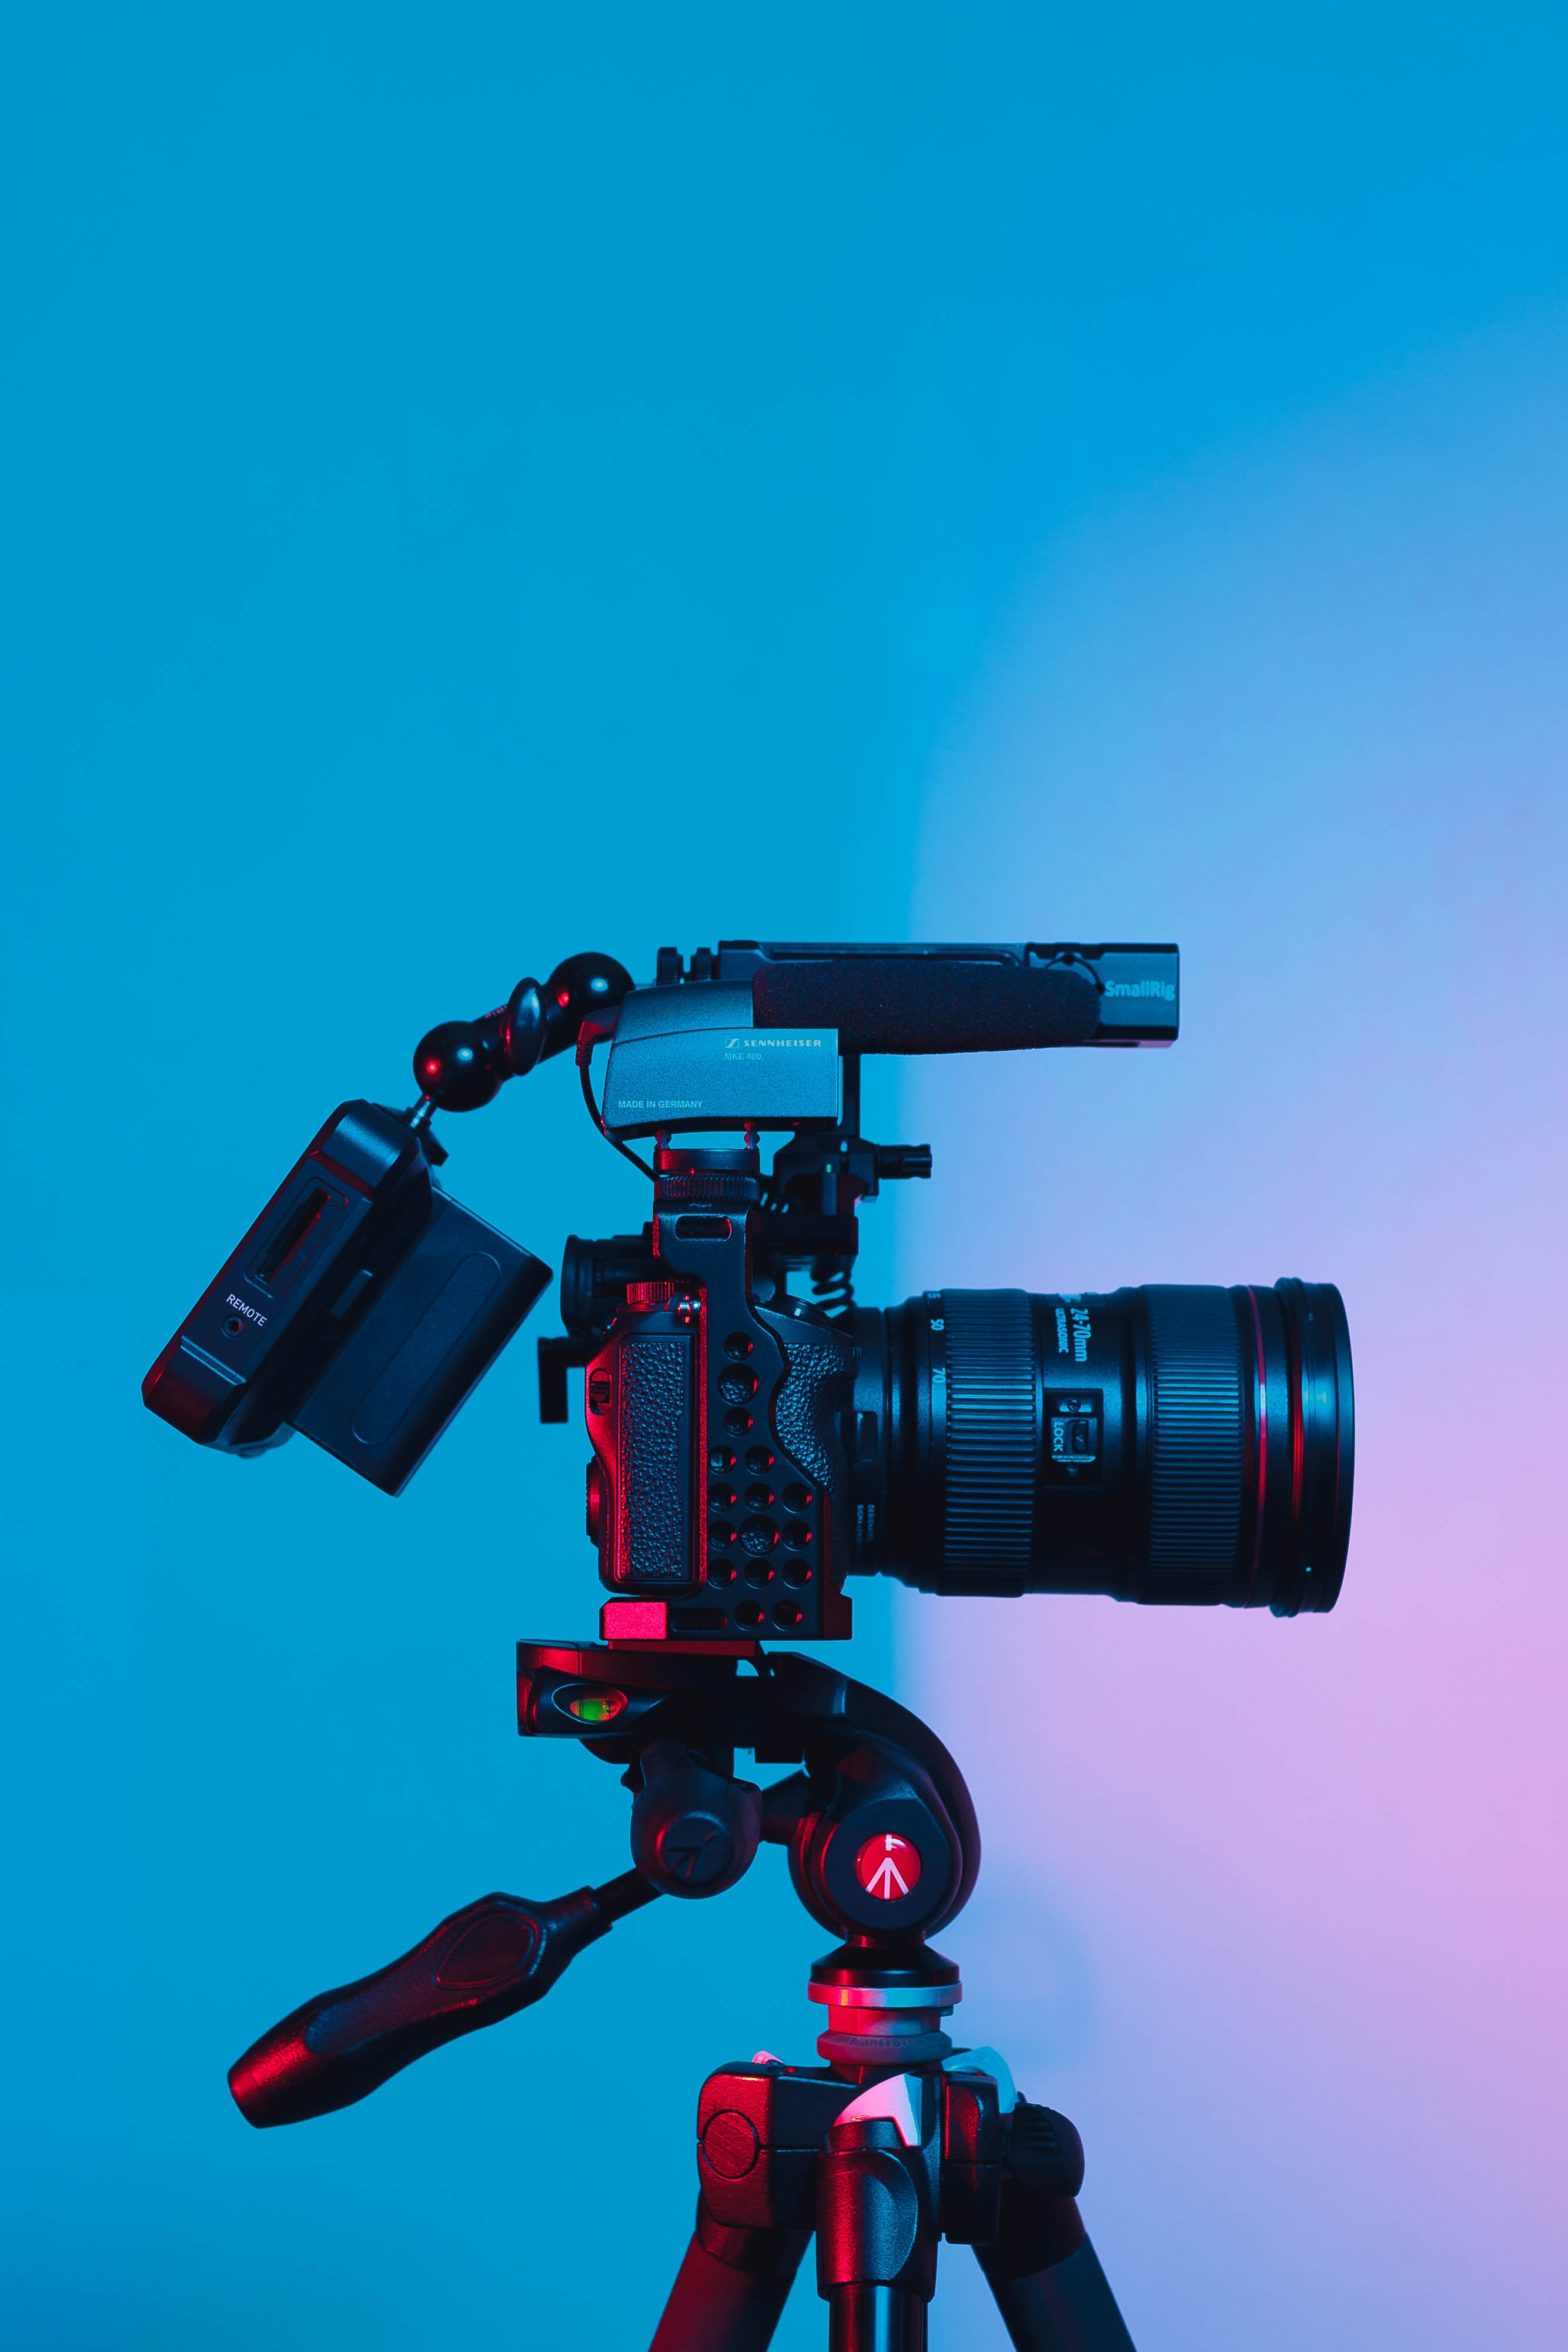 How to produce a video: The ultimate guide to video production